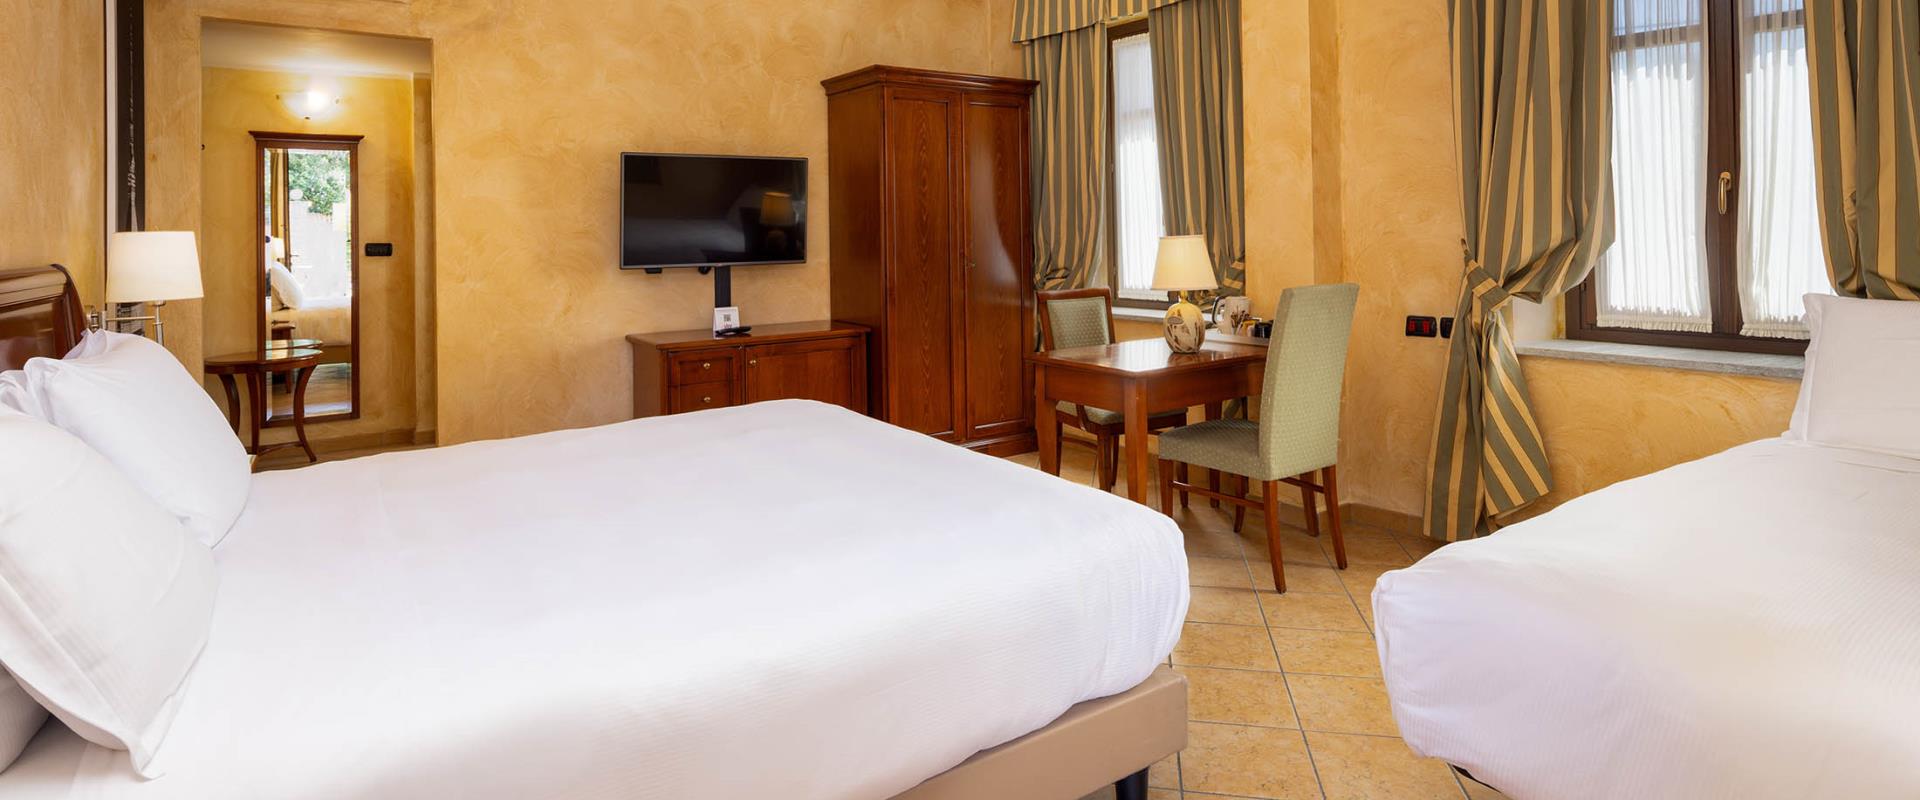 Sober and elegant, the rooms of the Best Western Plus Hotel Le Rondini Turin reflect the style of the old farmhouse and make your stay an unforgettable experience.